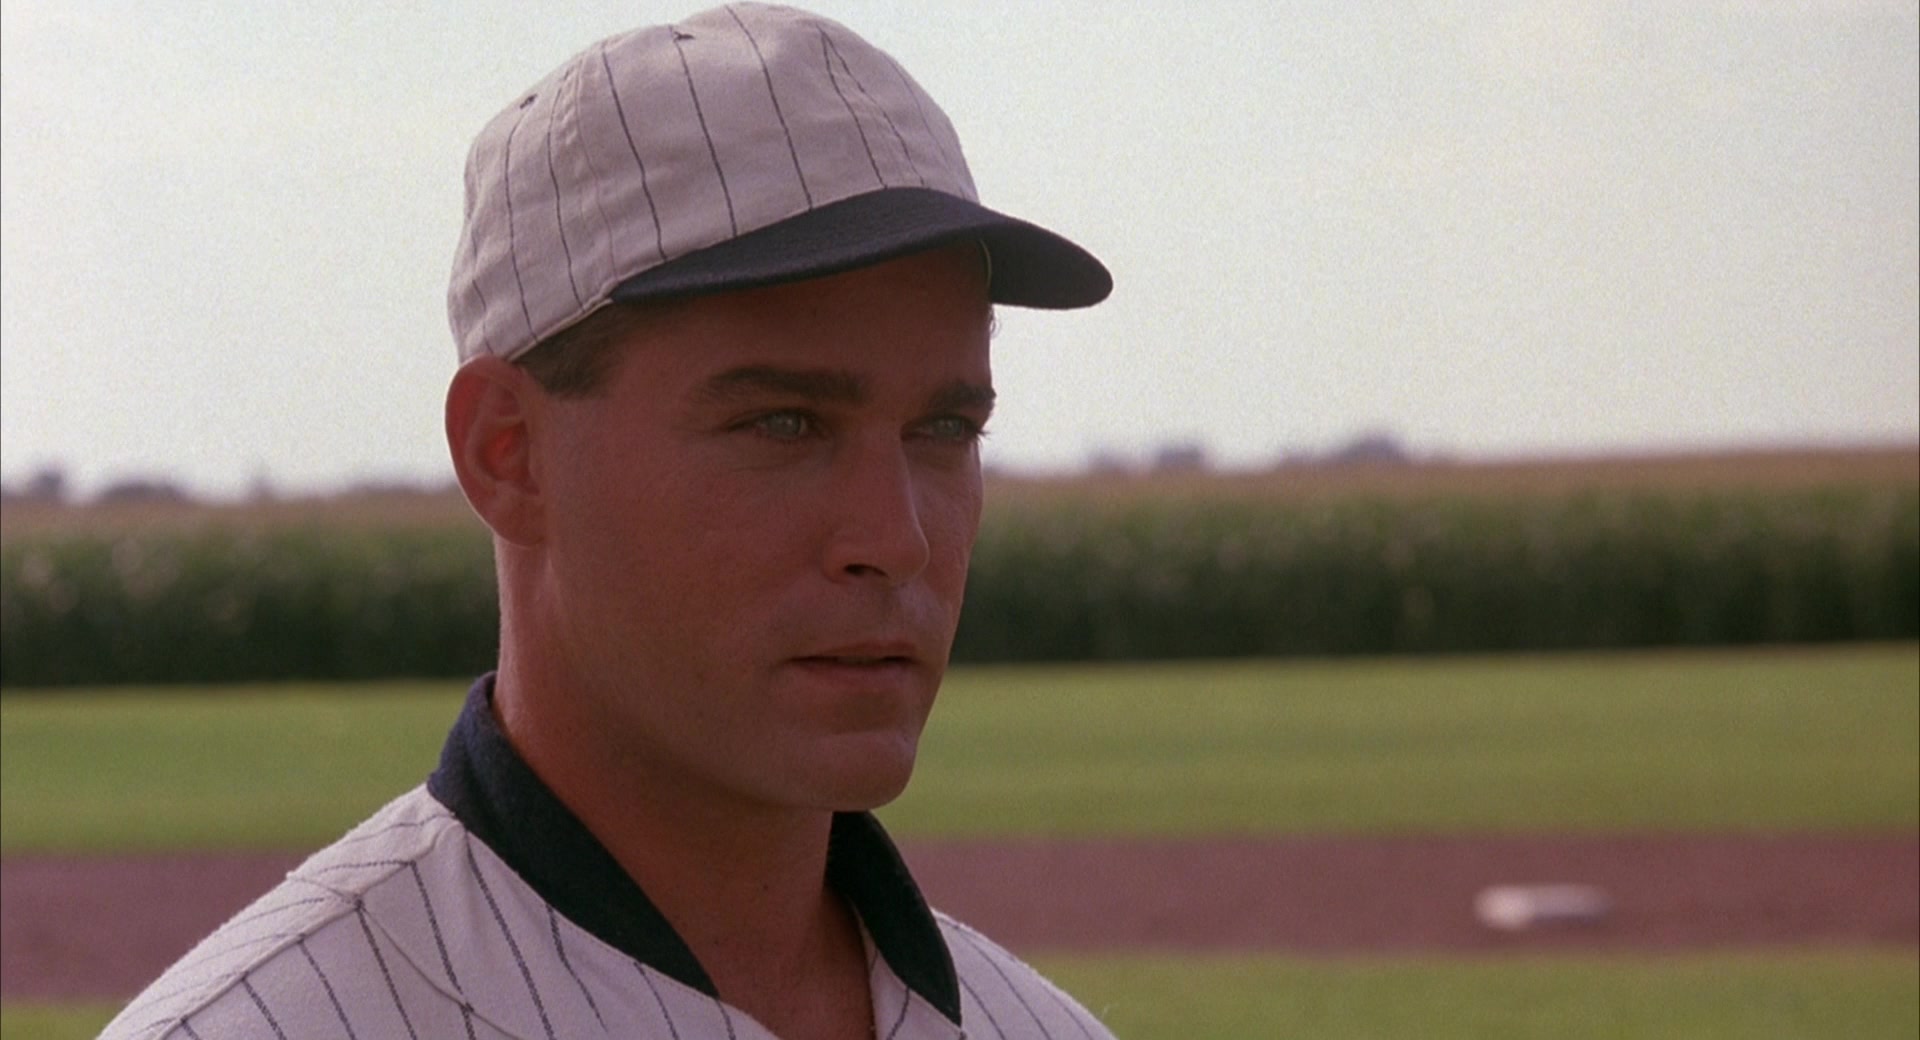 From Costner to Jackson: Where is the Field of Dreams Cast Today